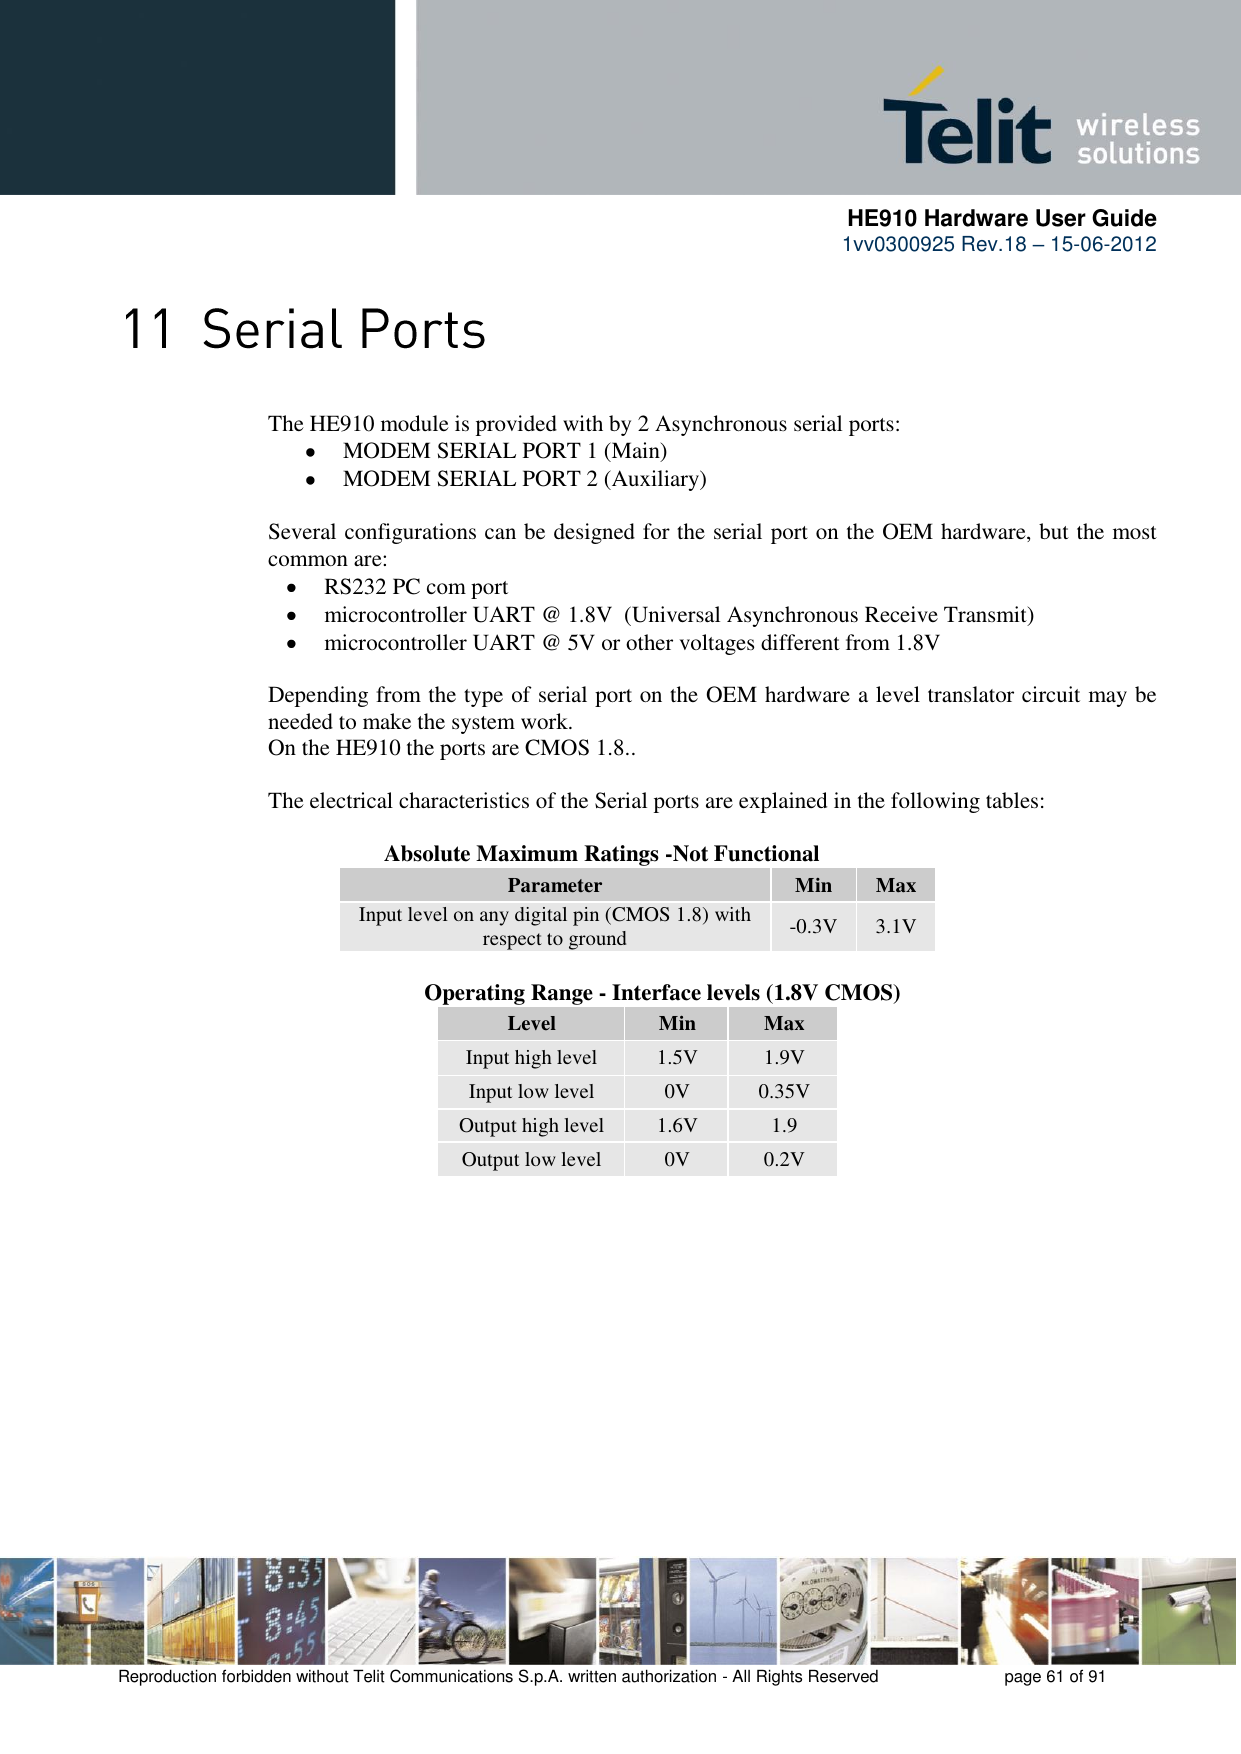      HE910 Hardware User Guide 1vv0300925 Rev.18 – 15-06-2012    Reproduction forbidden without Telit Communications S.p.A. written authorization - All Rights Reserved    page 61 of 91   The HE910 module is provided with by 2 Asynchronous serial ports:  MODEM SERIAL PORT 1 (Main)  MODEM SERIAL PORT 2 (Auxiliary)  Several configurations can be designed for the serial port on the OEM hardware, but the most common are:  RS232 PC com port  microcontroller UART @ 1.8V  (Universal Asynchronous Receive Transmit)   microcontroller UART @ 5V or other voltages different from 1.8V   Depending from the type of serial port on the OEM hardware a level translator circuit may be needed to make the system work.  On the HE910 the ports are CMOS 1.8..   The electrical characteristics of the Serial ports are explained in the following tables:      Absolute Maximum Ratings -Not Functional Parameter Min Max Input level on any digital pin (CMOS 1.8) with respect to ground -0.3V 3.1V              Operating Range - Interface levels (1.8V CMOS) Level Min Max Input high level 1.5V 1.9V Input low level 0V 0.35V Output high level 1.6V 1.9 Output low level 0V 0.2V  